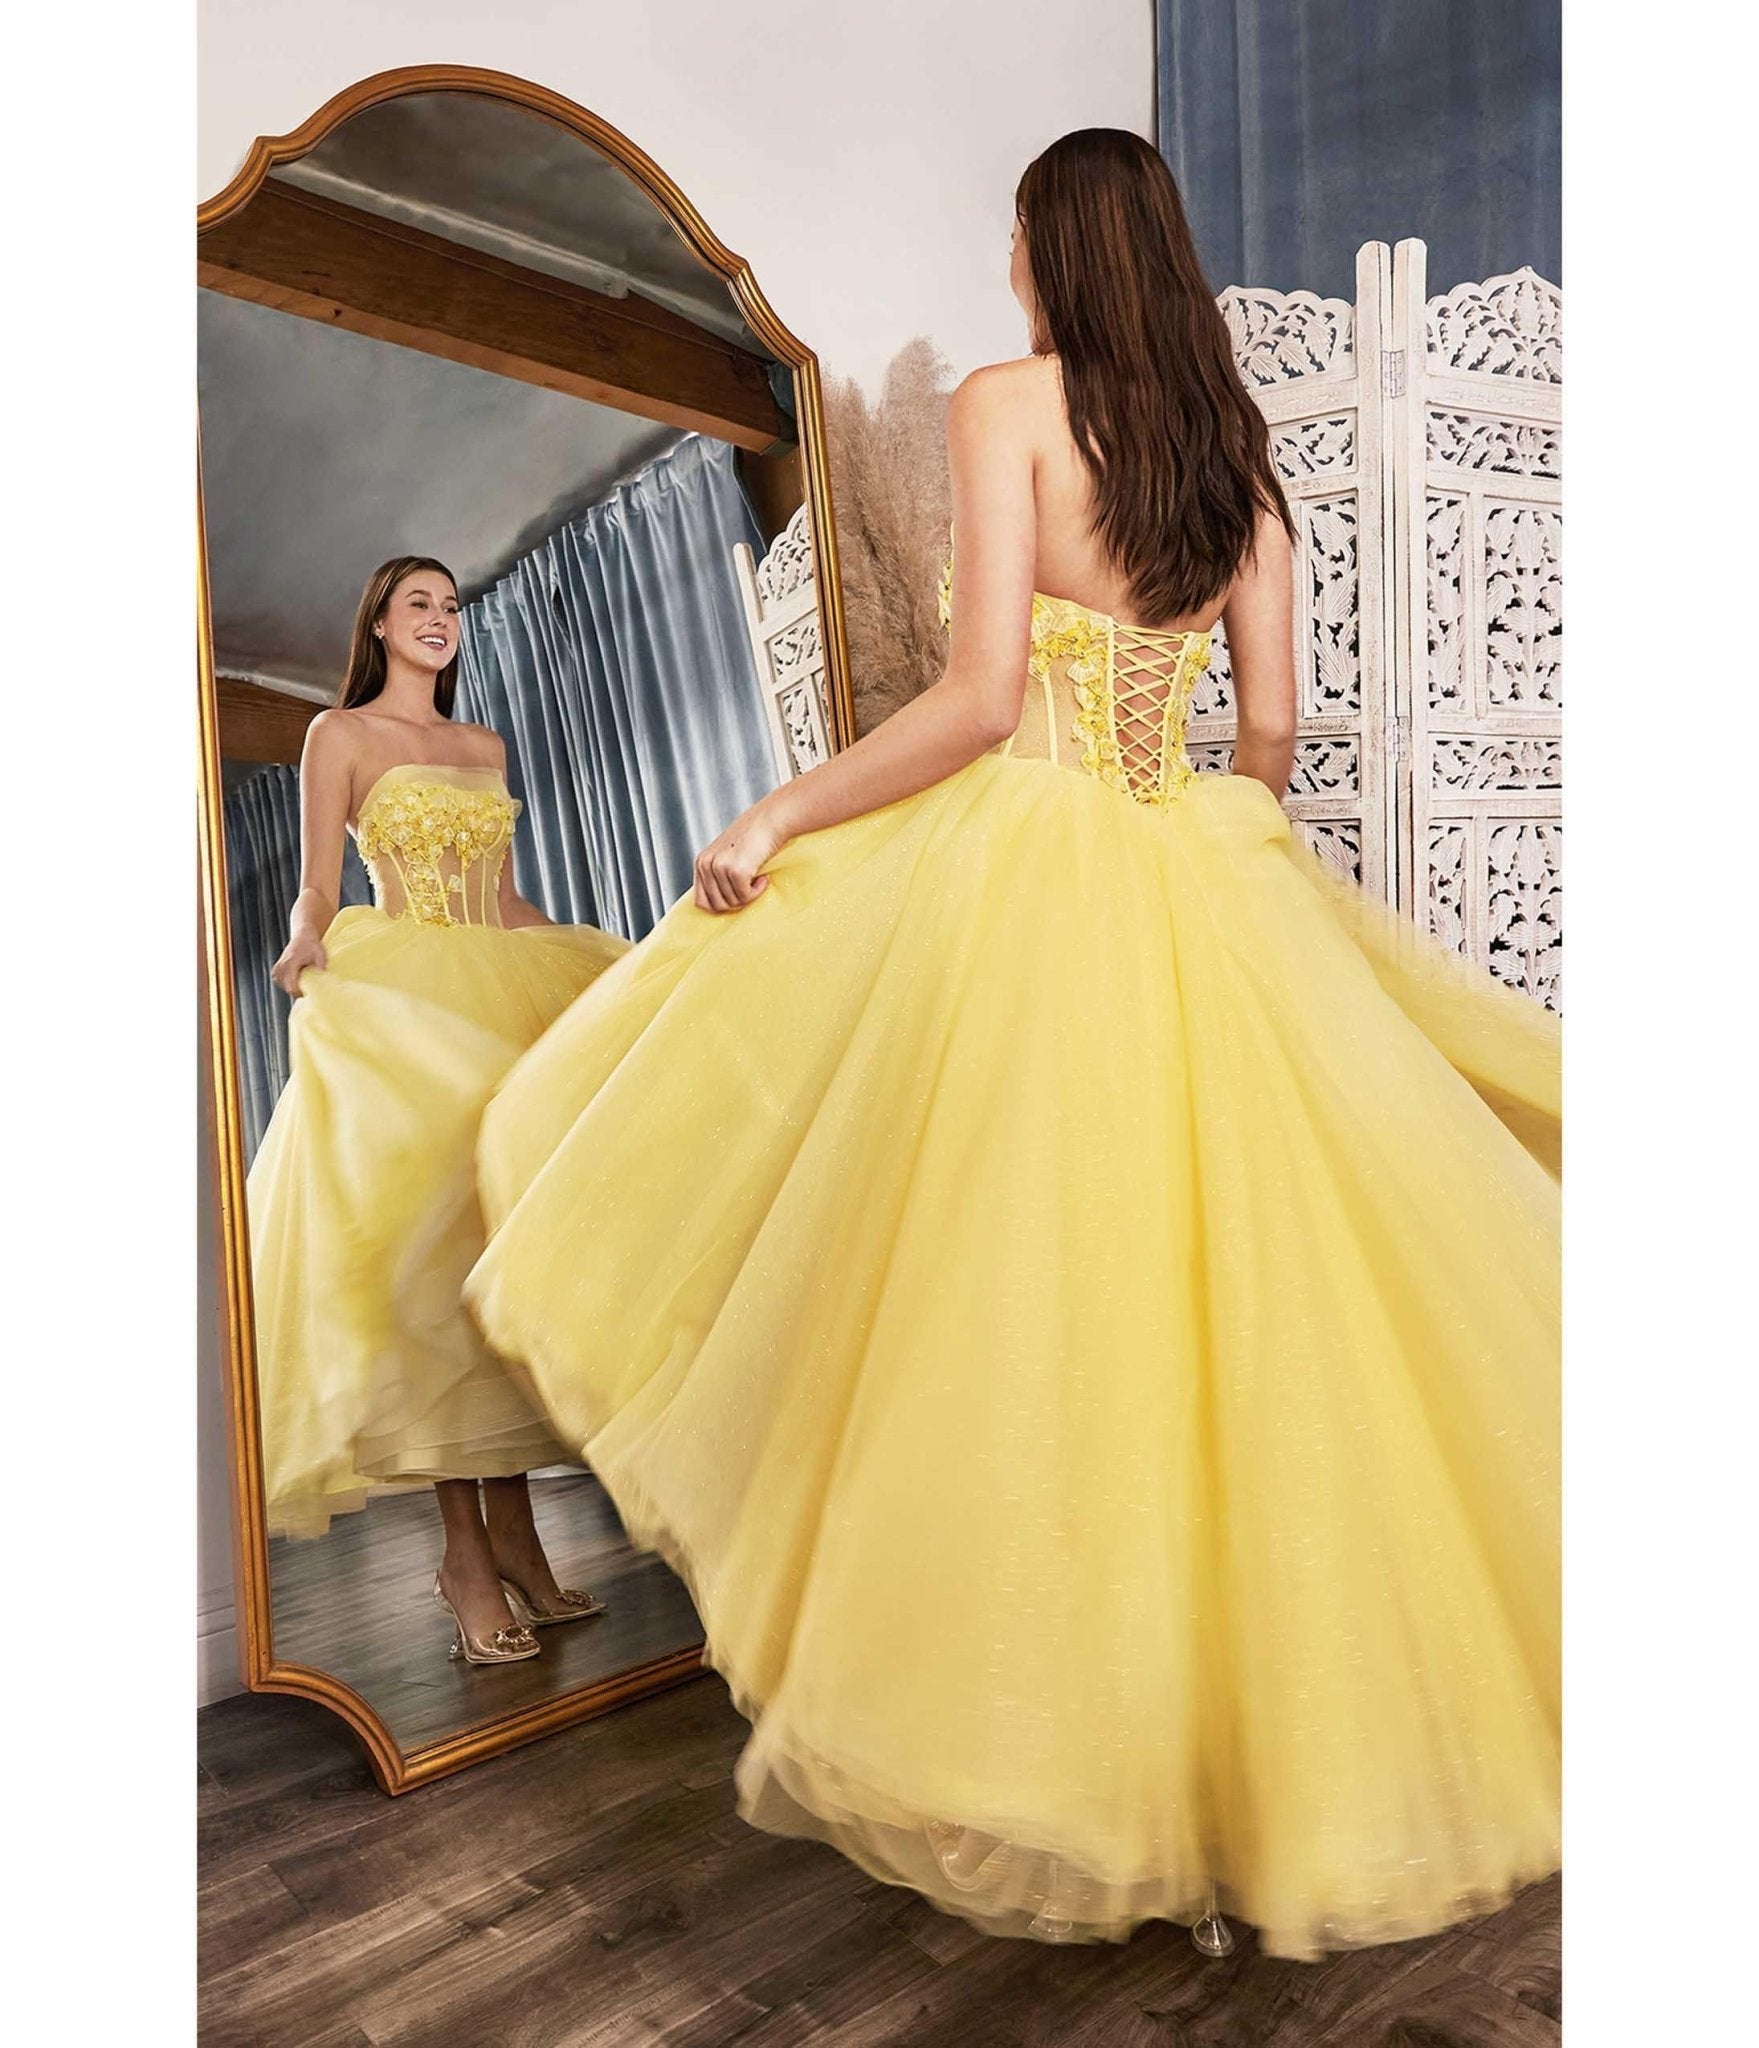 Sunshine Yellow Chiffon Royal Tea Length Bridesmaid Dress - Unique Vintage - Womens, DRESSES, PROM AND SPECIAL OCCASION